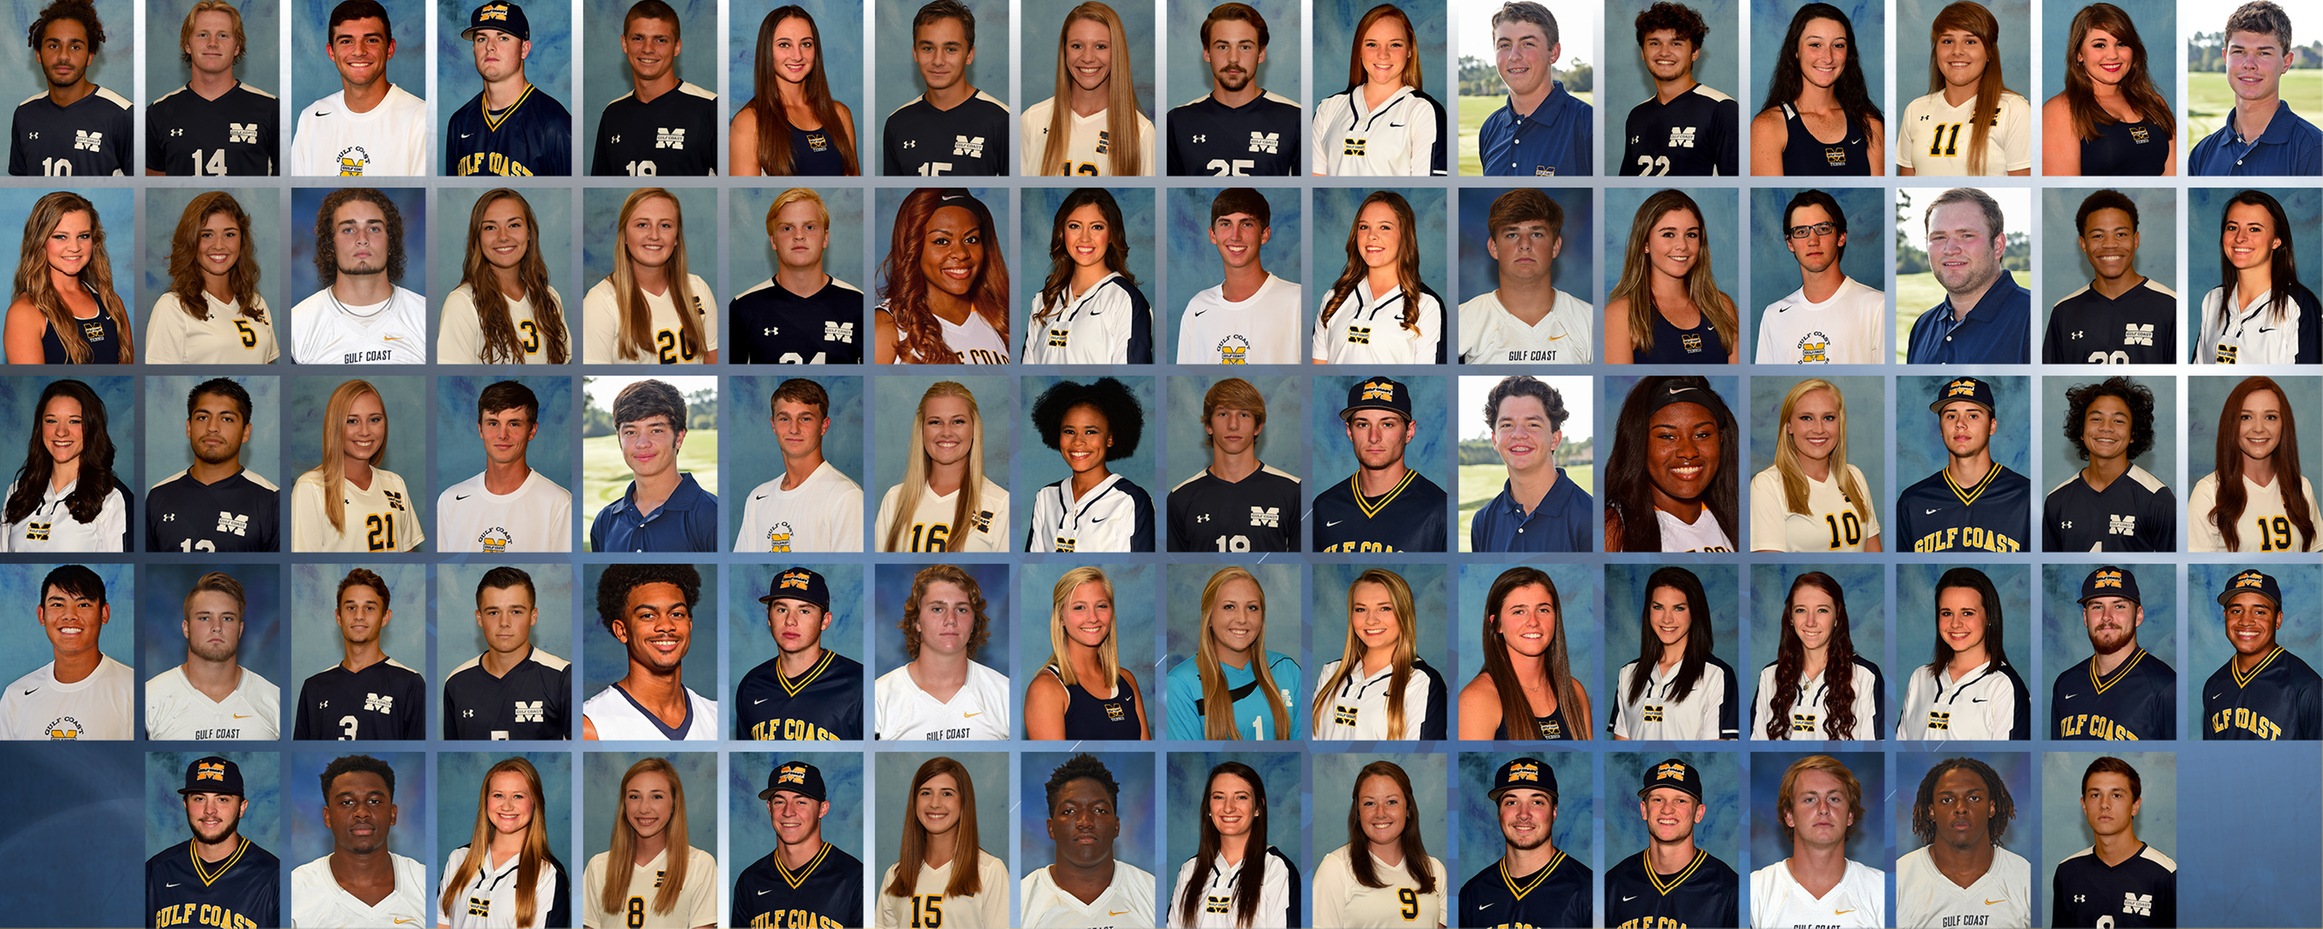 78 MGCCC student-athletes earn MACJC academic awards